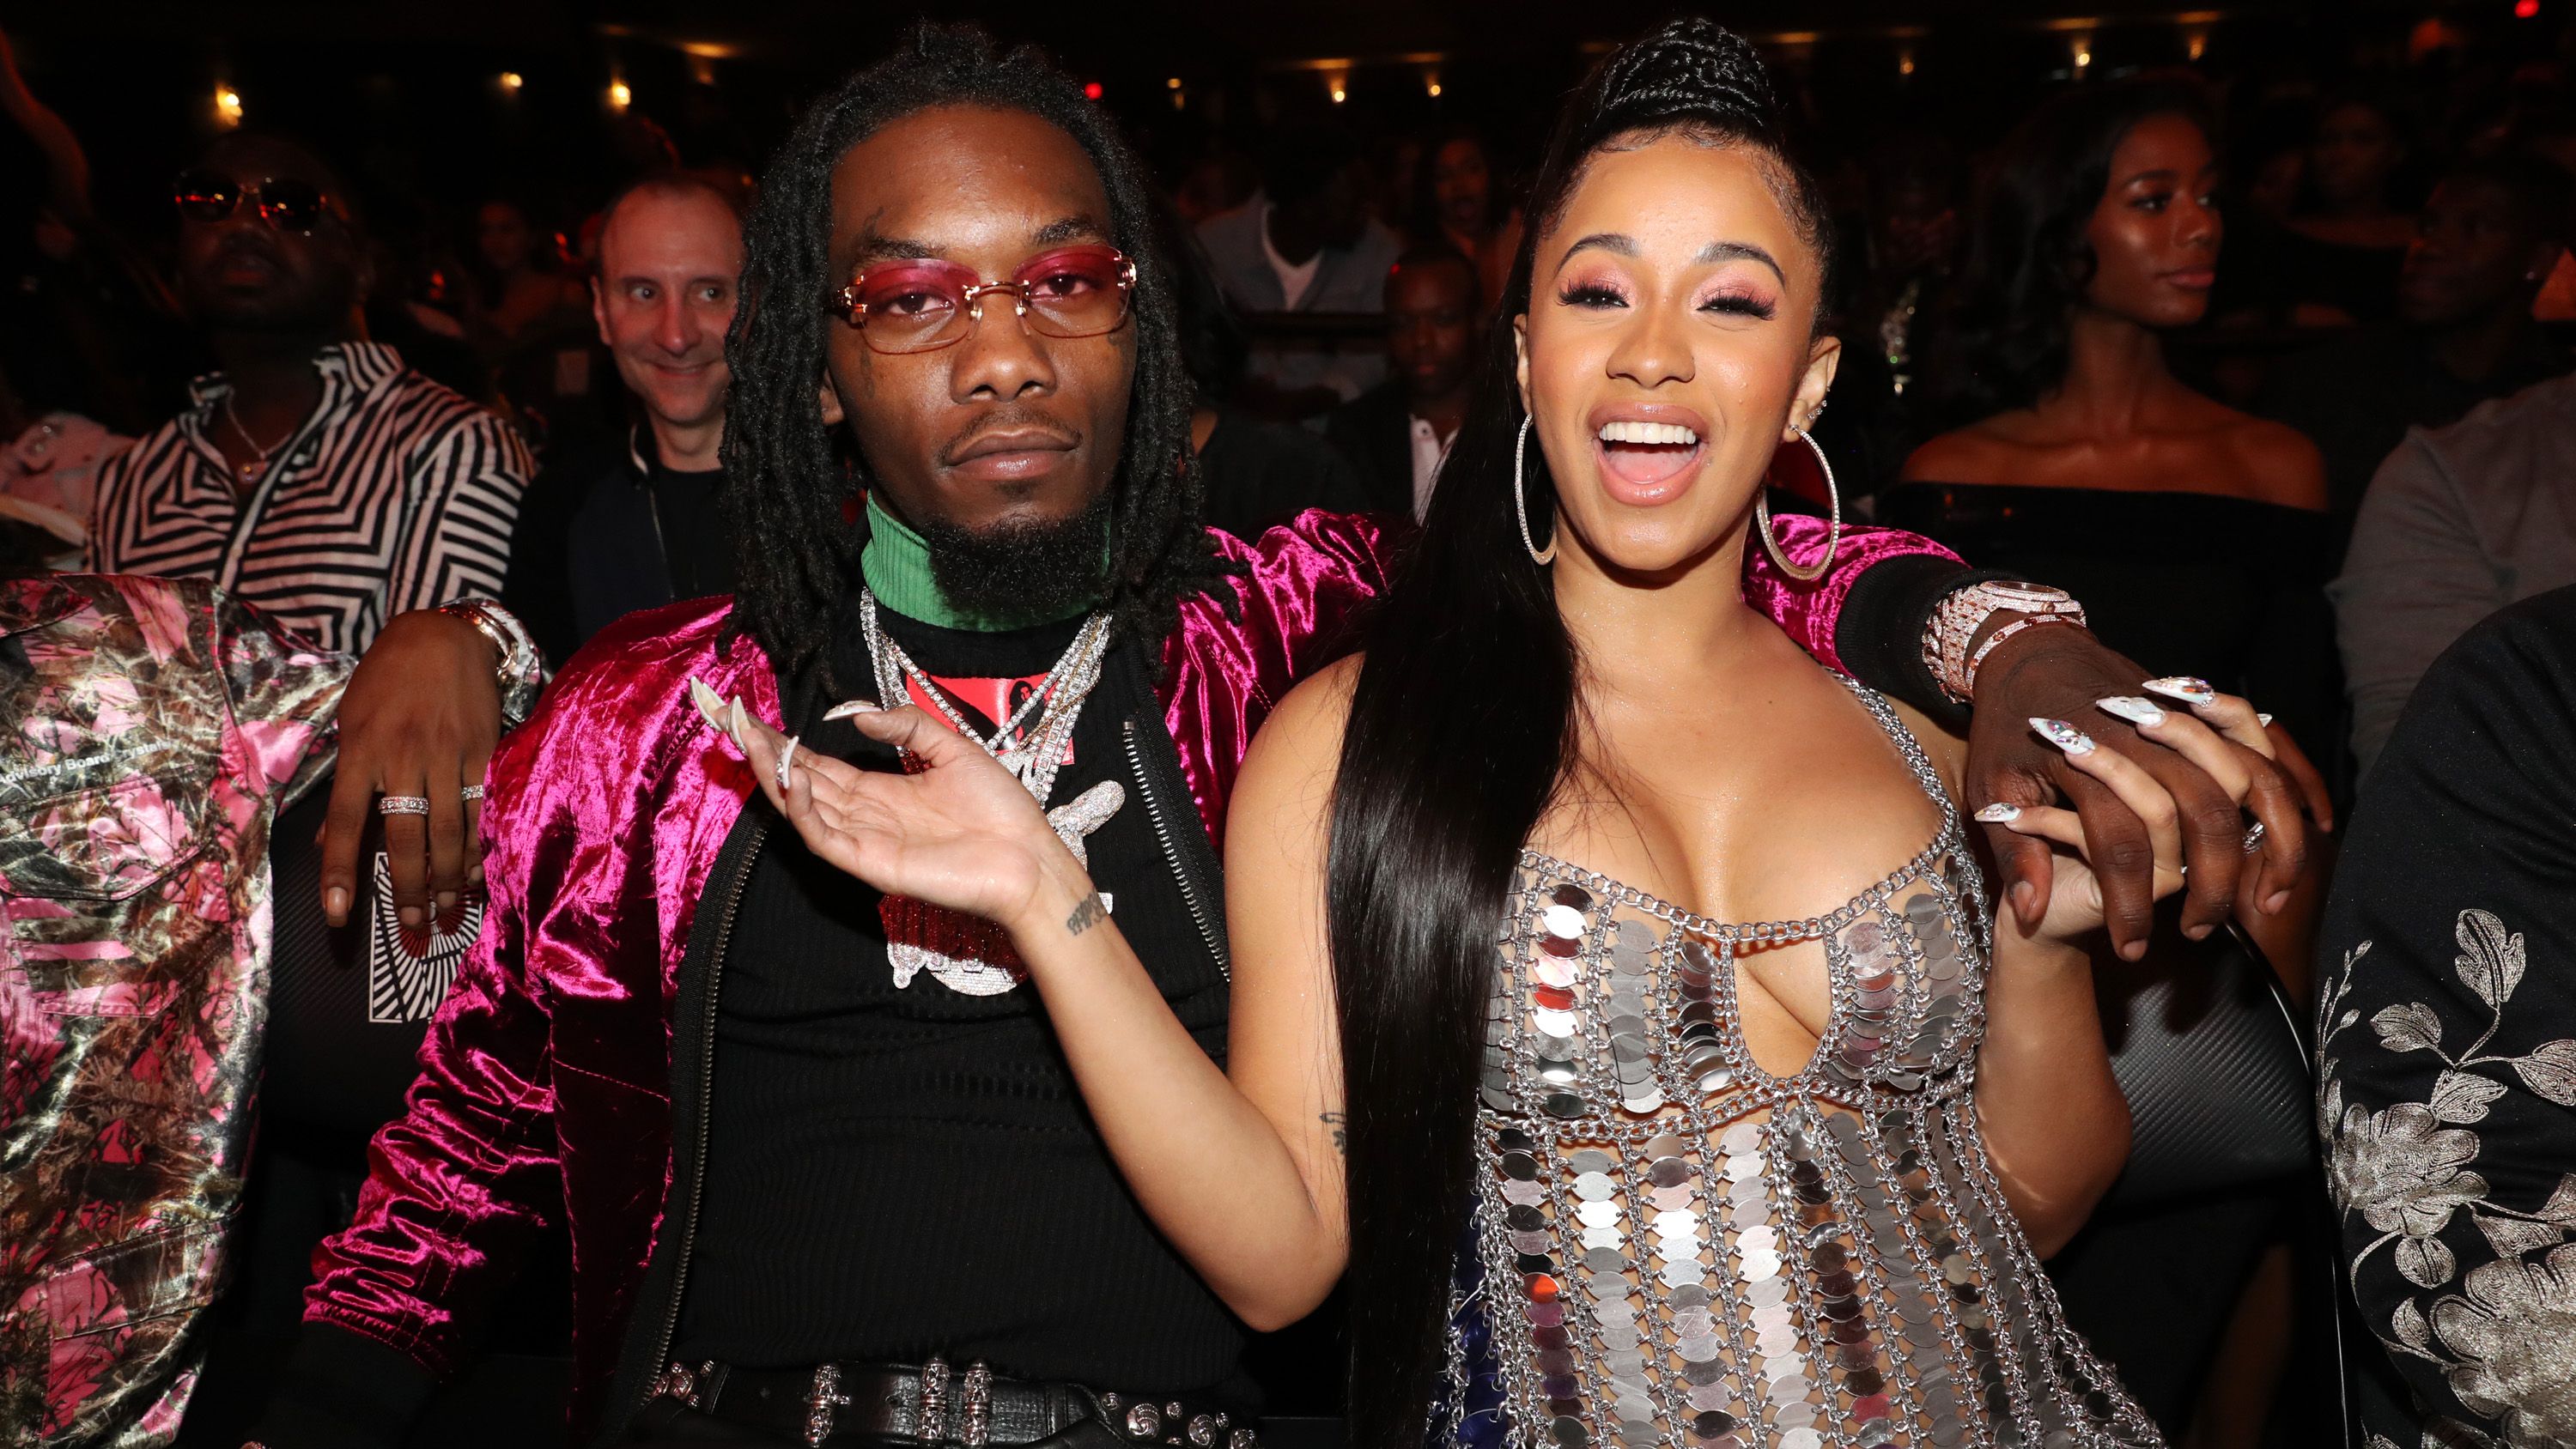 Cardi B Defends Offset For Buying 2-Year-Old Kulture An Expensive